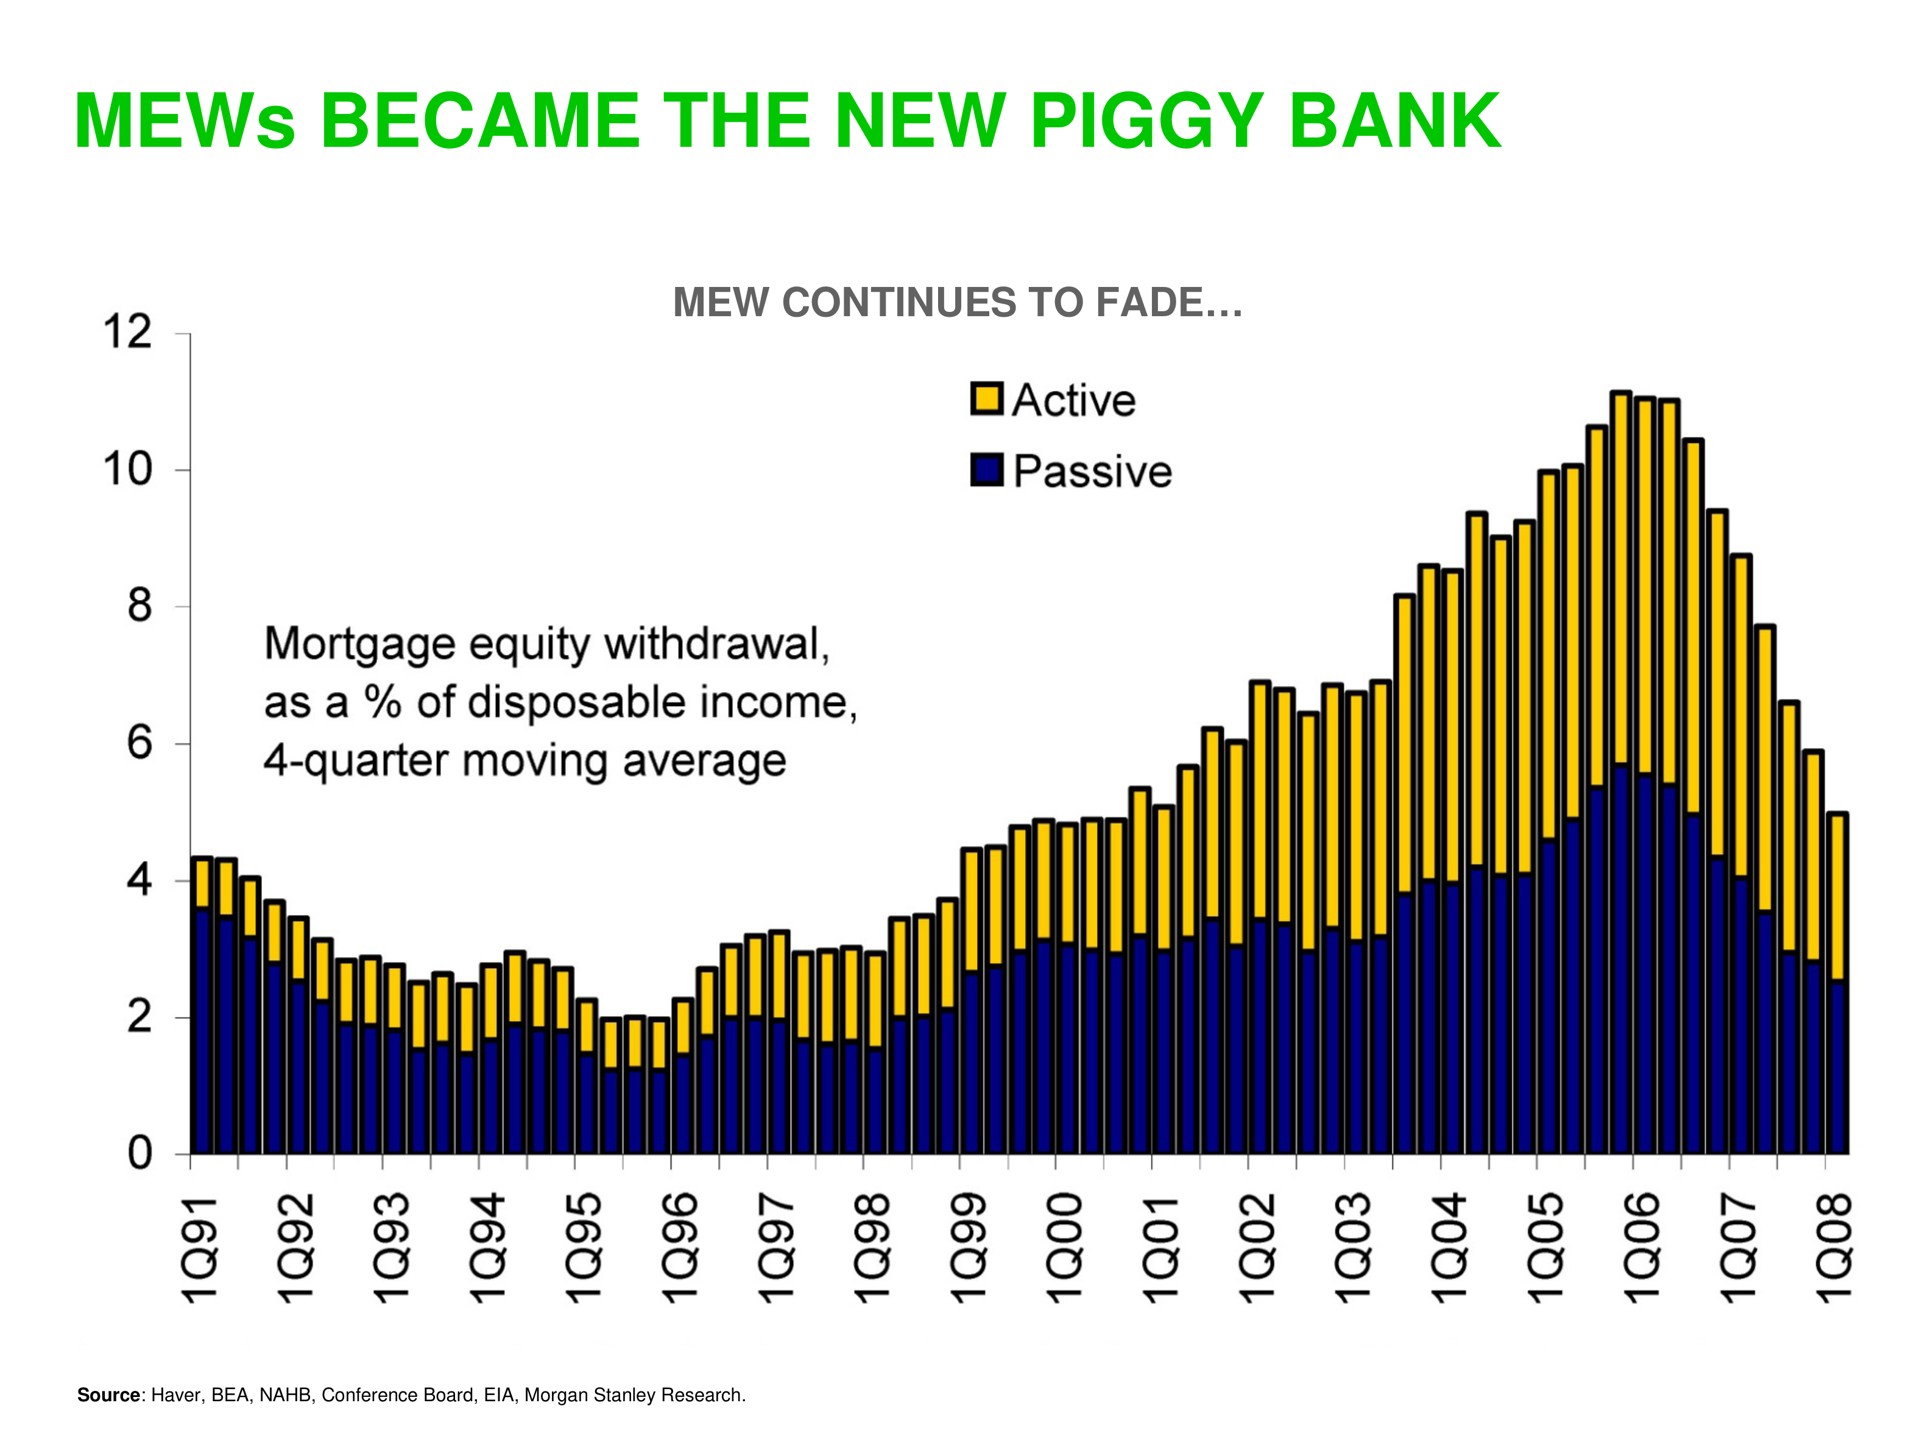 mews became the new piggy bank | Sequoia Capital